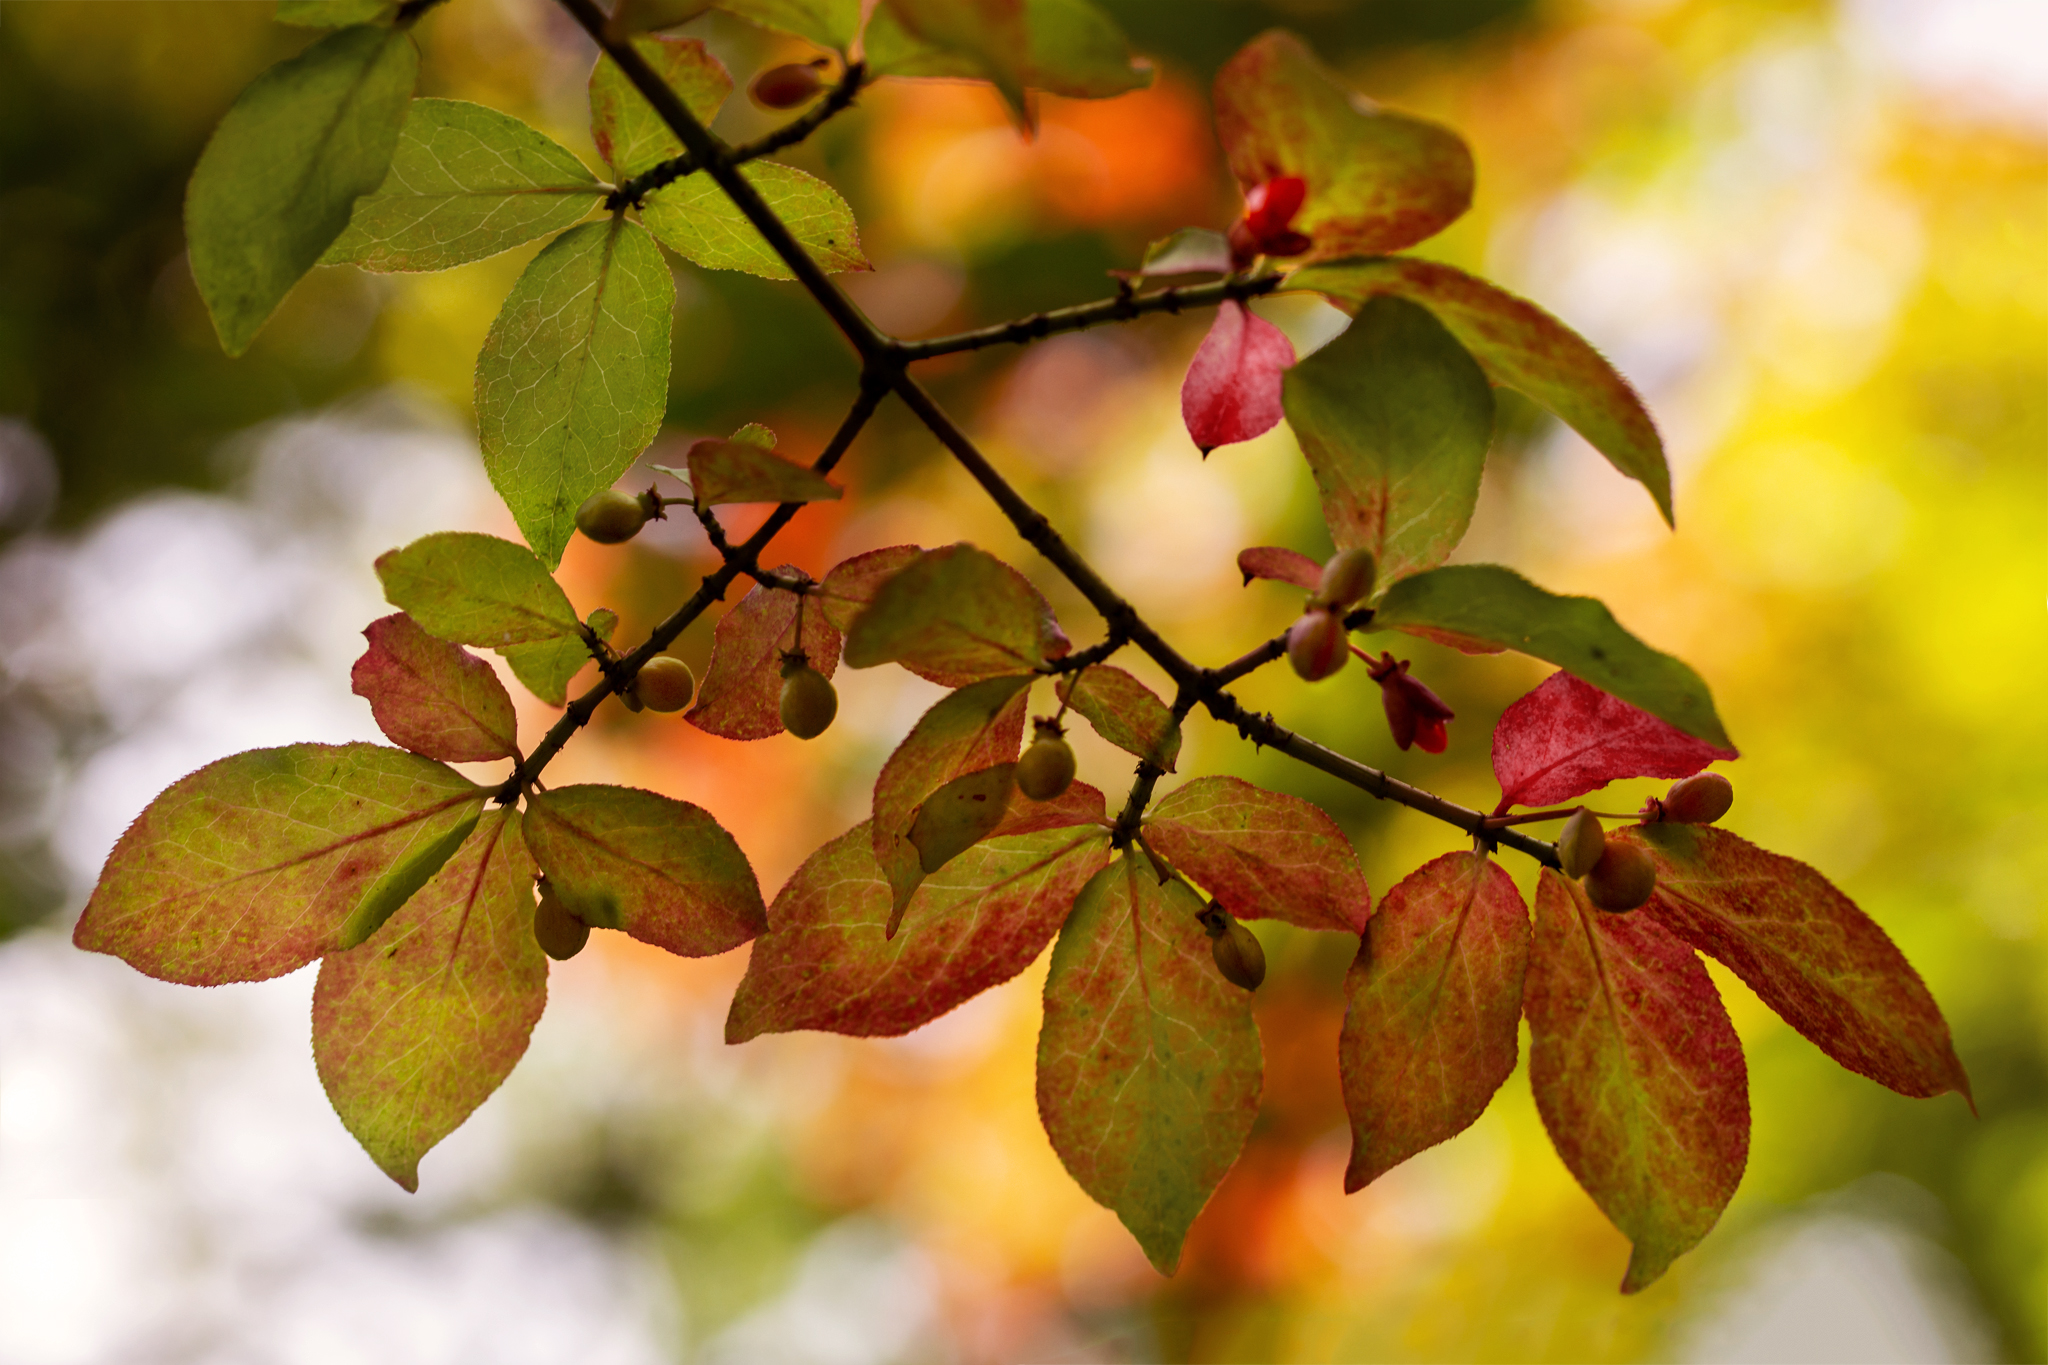 Complementary red and green leaves